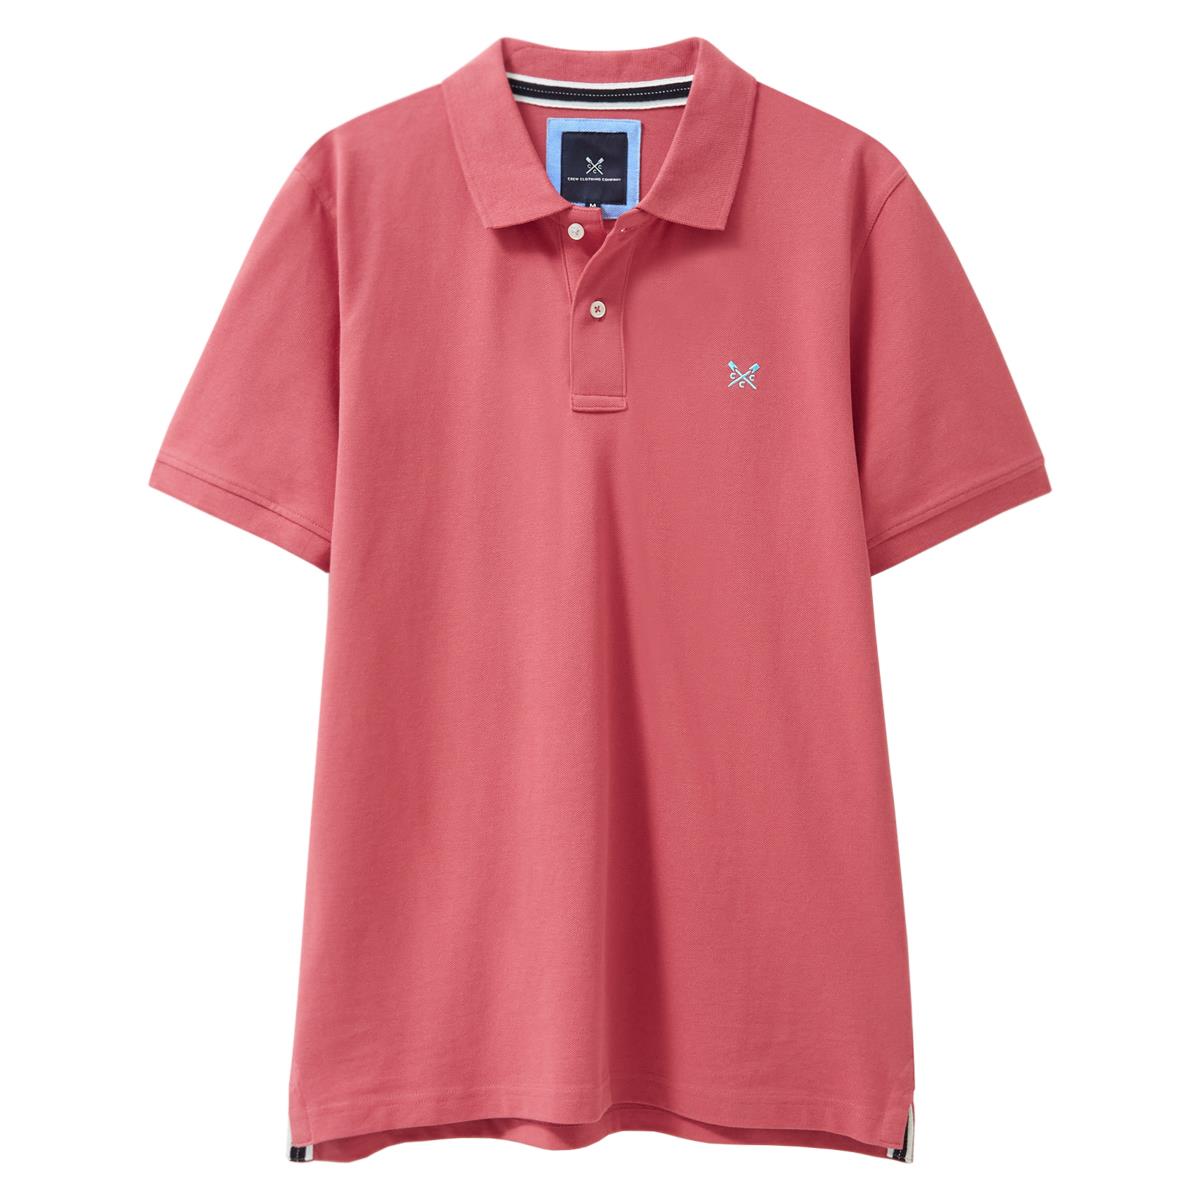 For what occasions are crew polo shirts suitable?